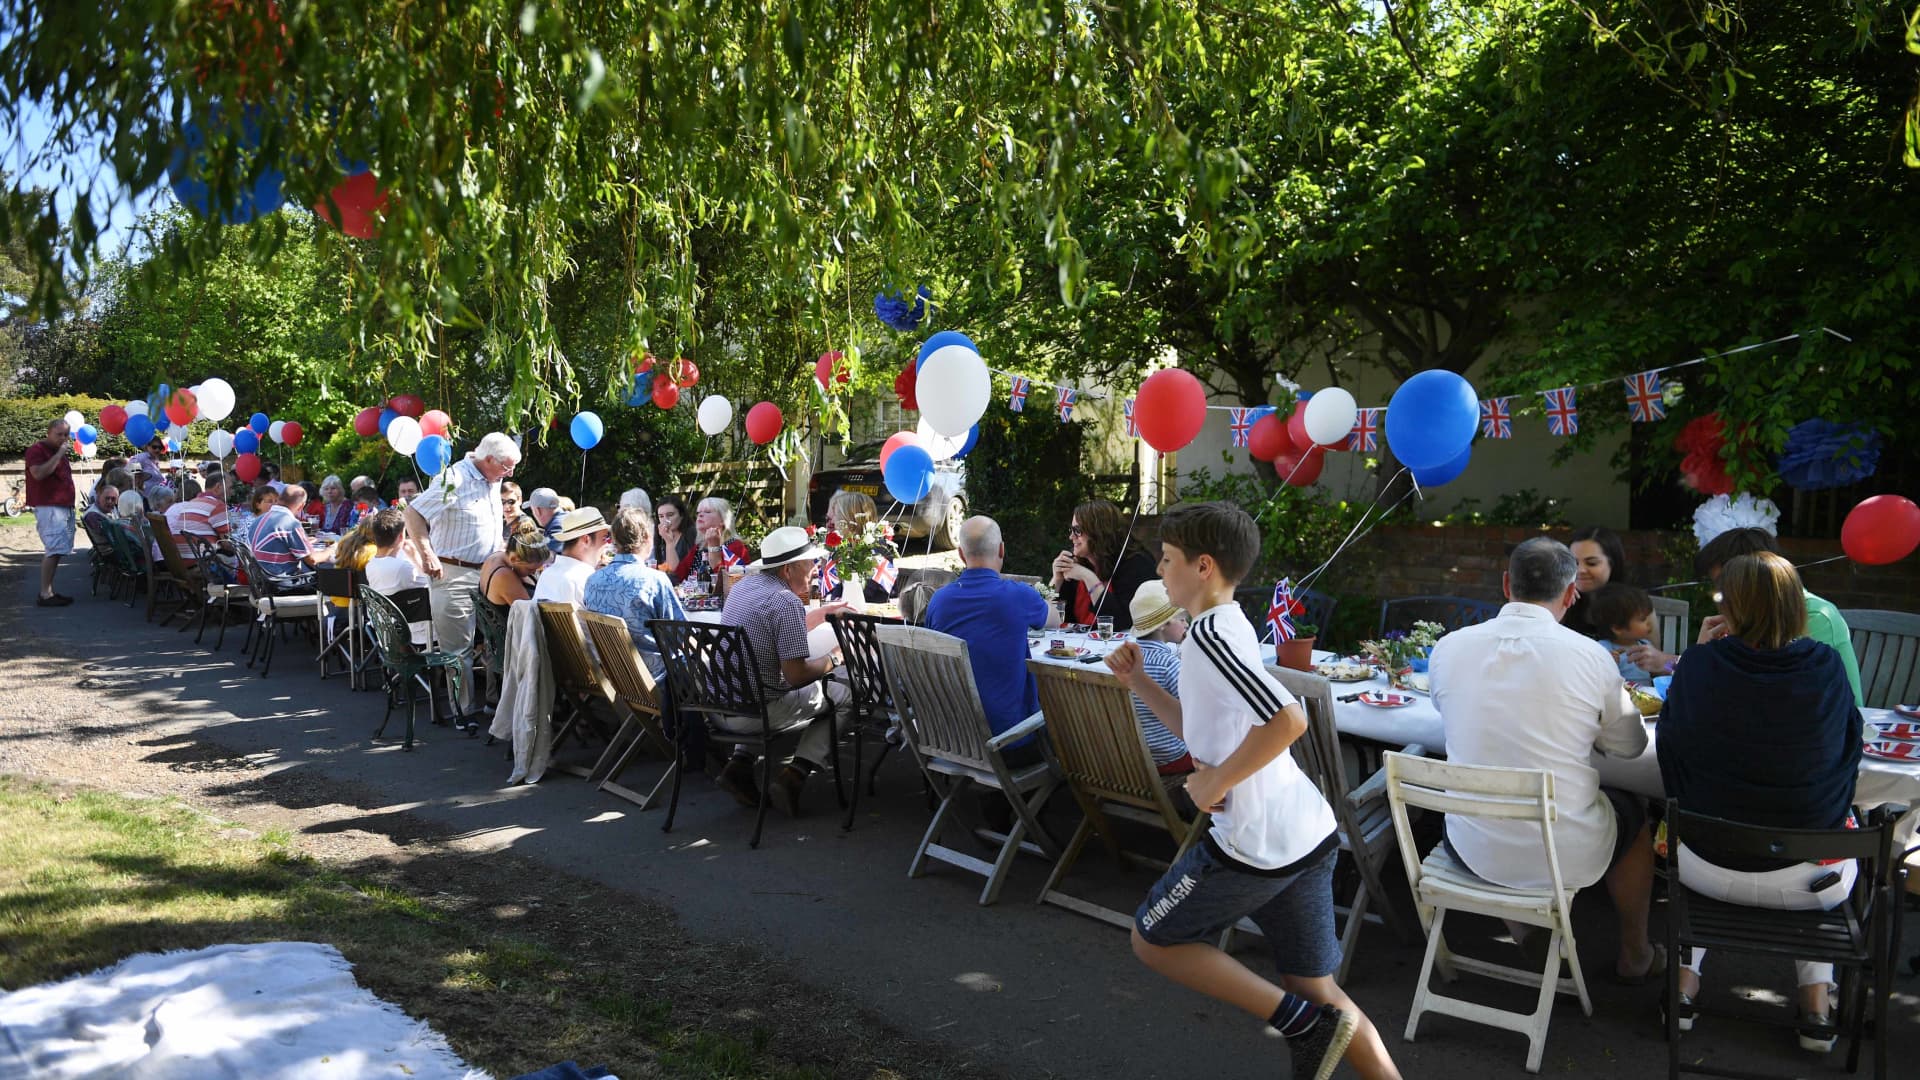 Street parties are a quintessentially British way to celebrate royal occasions, with neighbors and local communities typically gathering outside to share food, drinks and games.